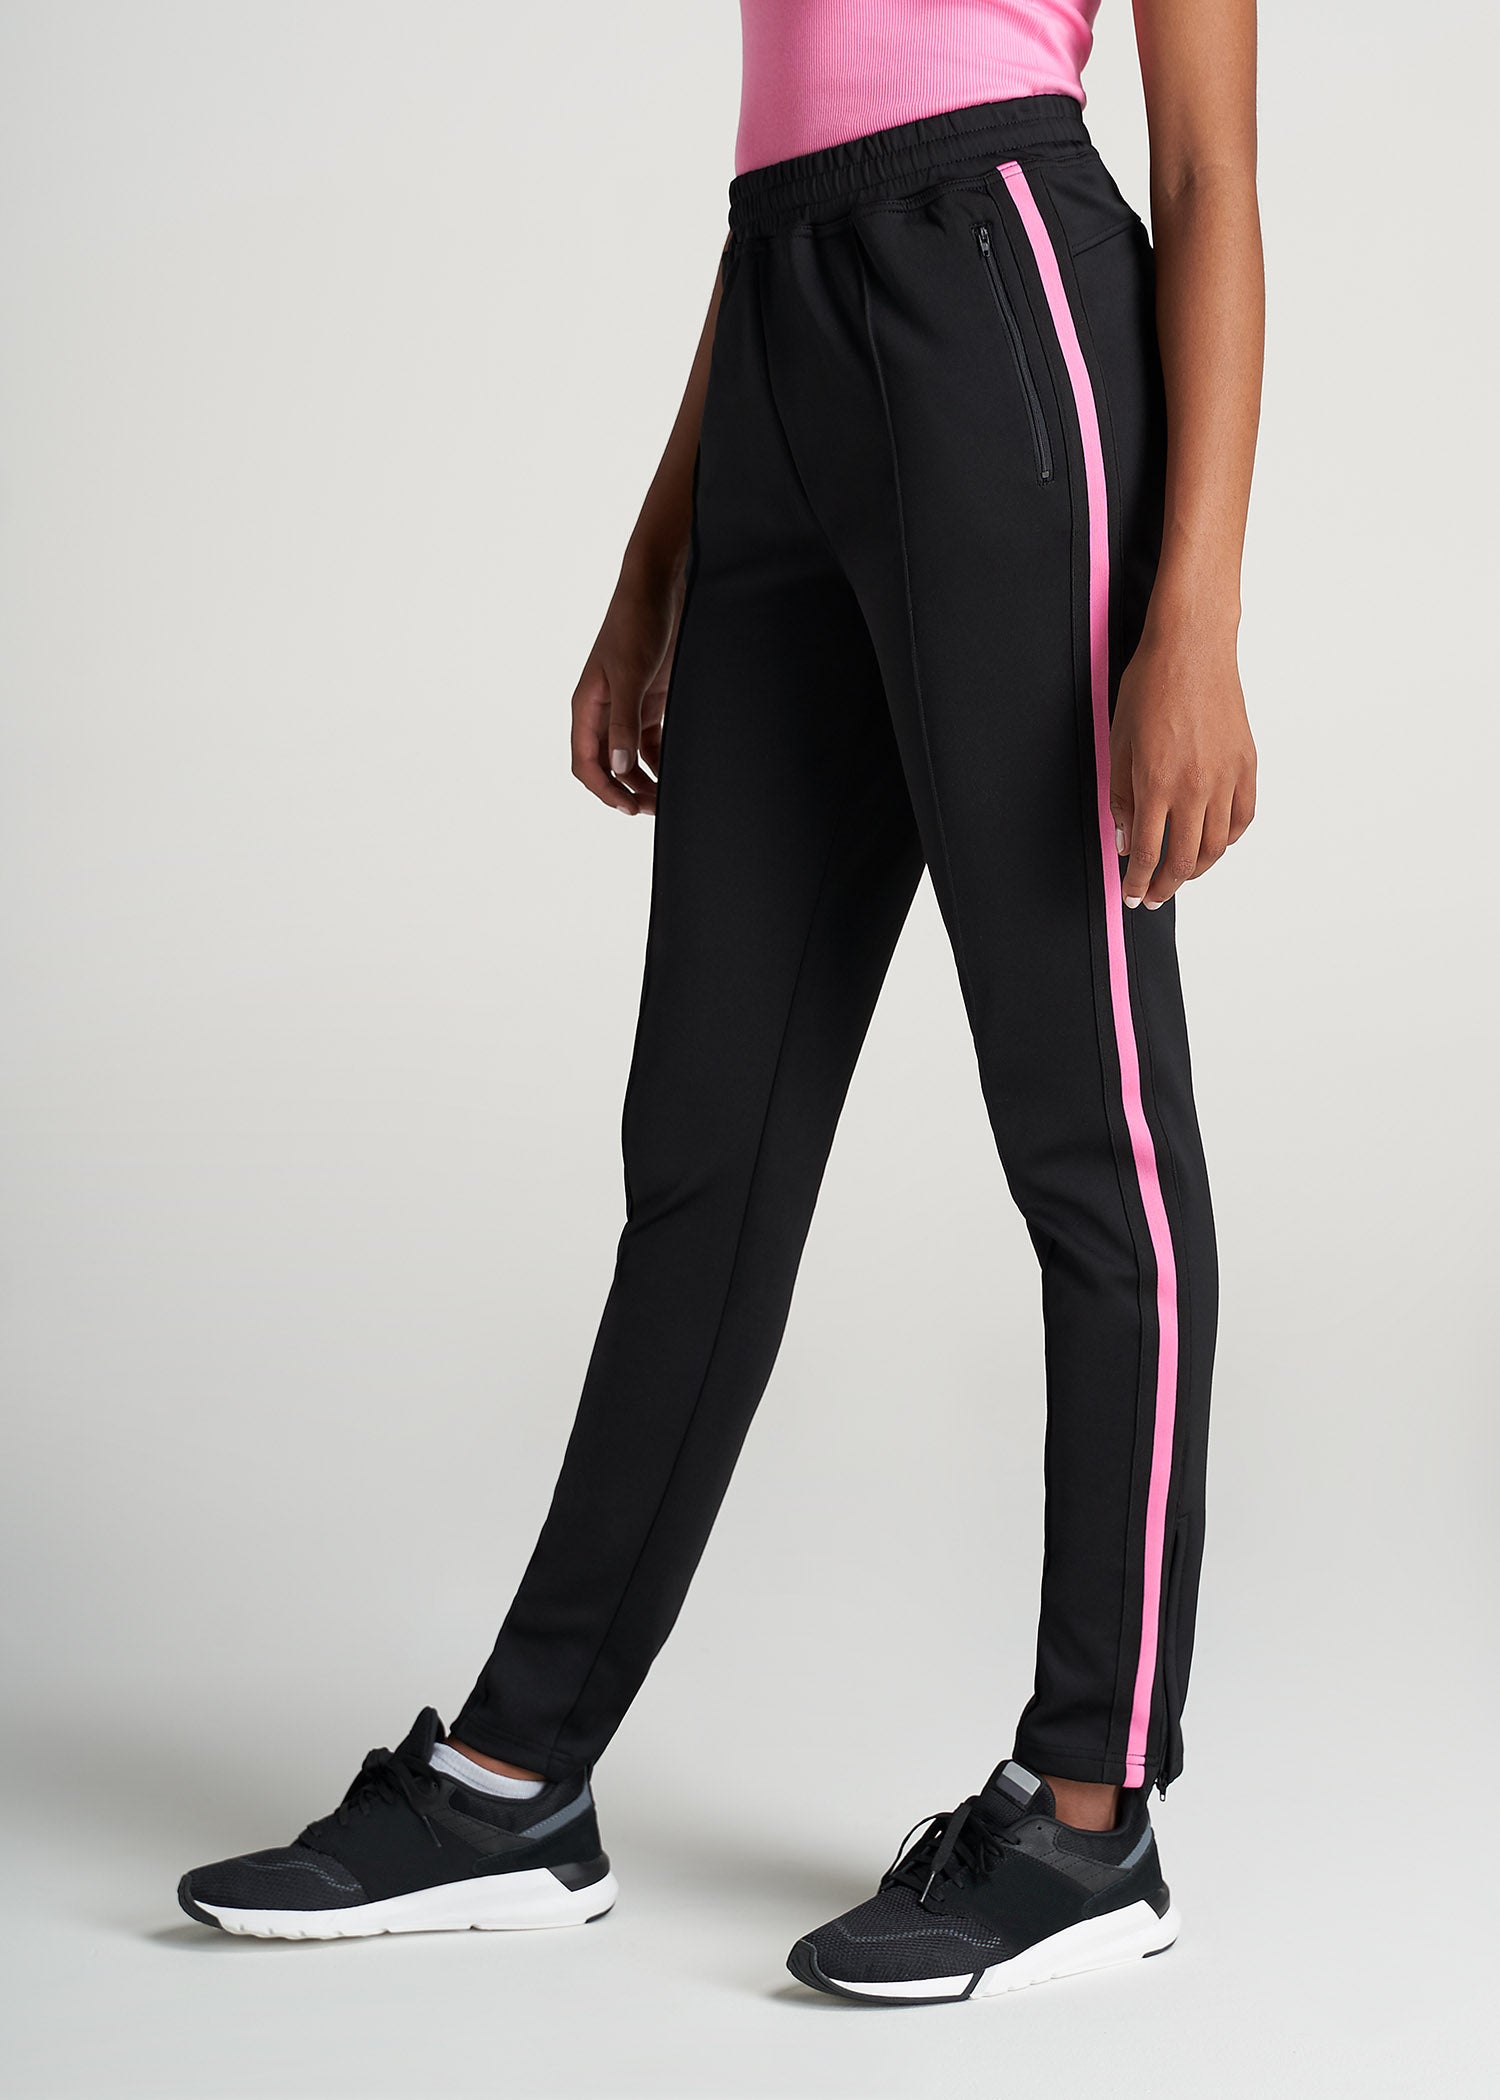 Women's Tall Athletic Pants in Black & Pink